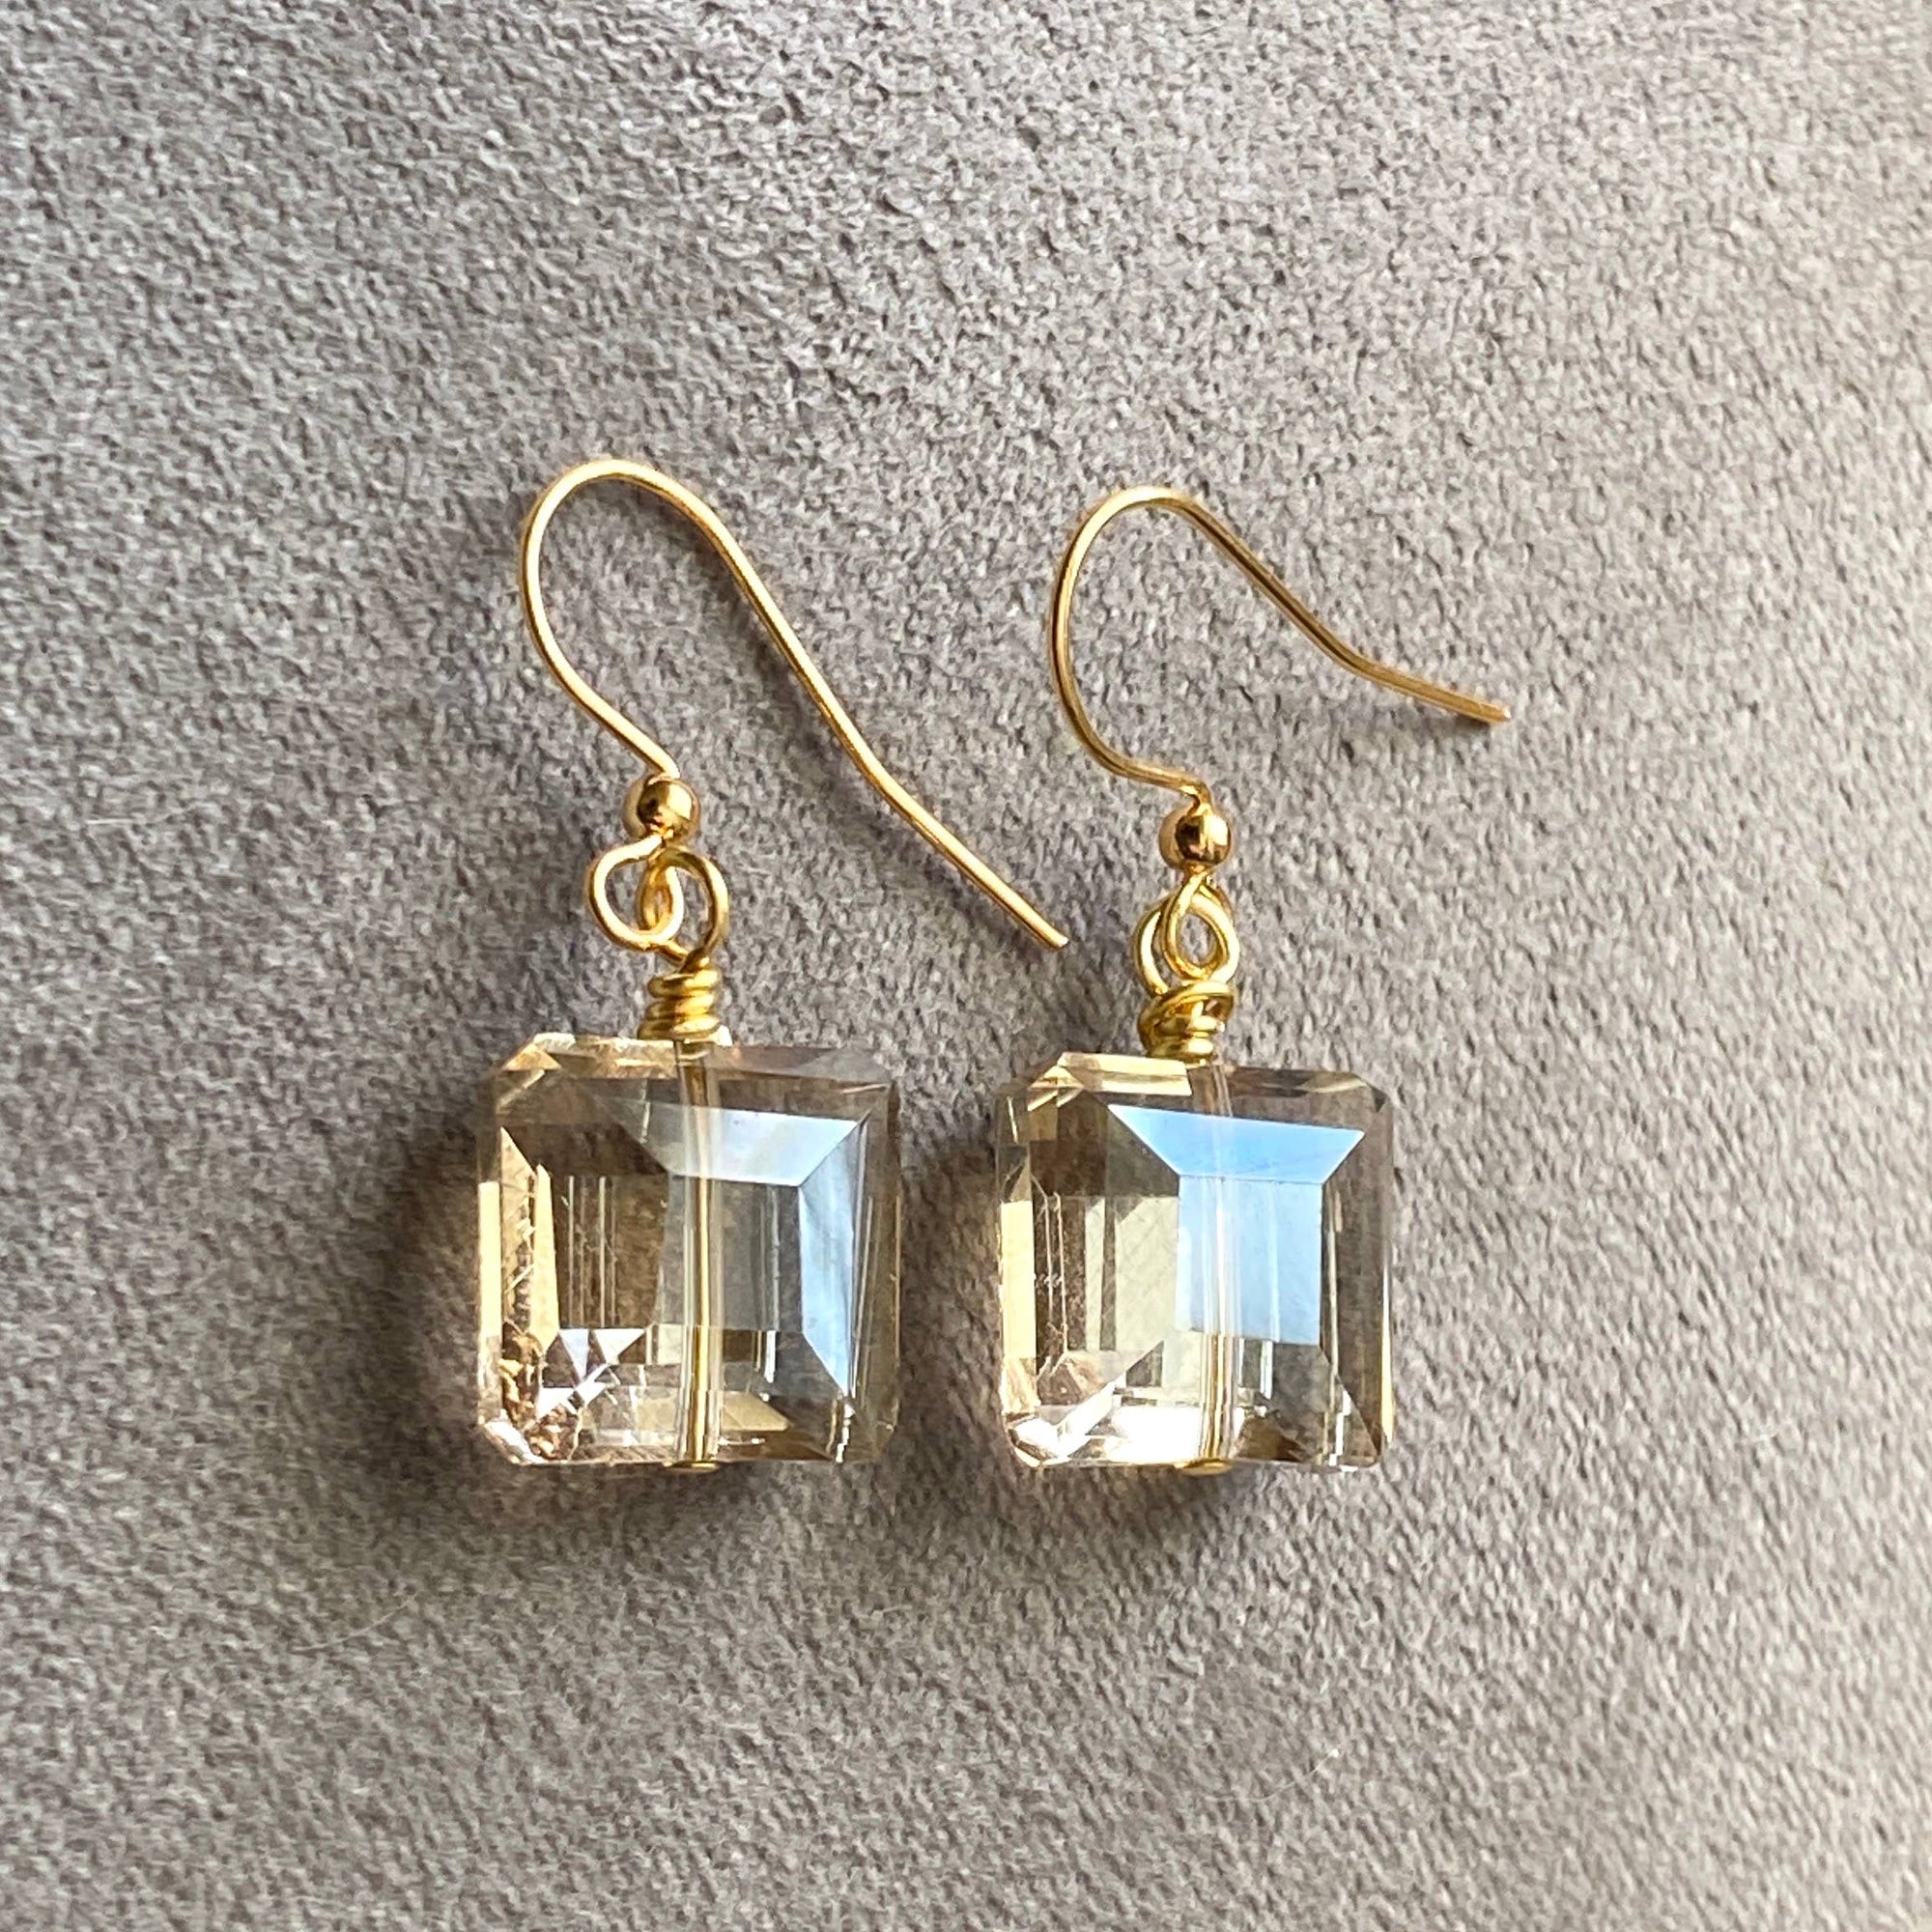 Crystal Earrings Gold Champagne Silver / Gold Elegant